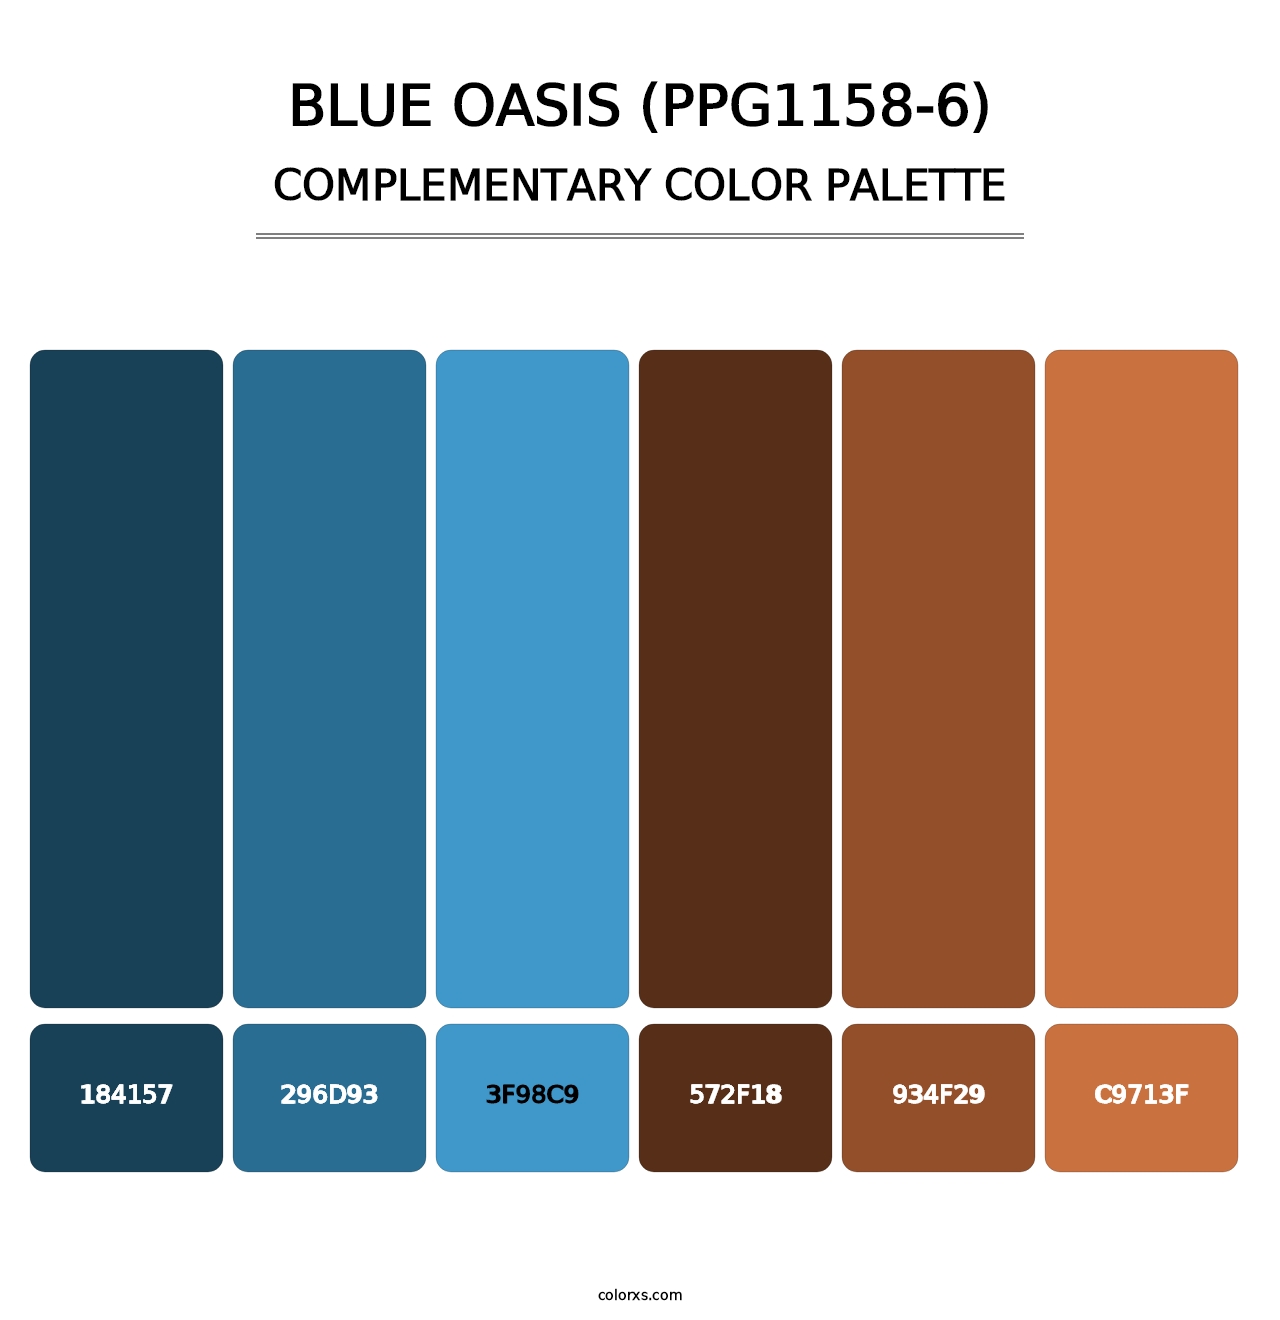 Blue Oasis (PPG1158-6) - Complementary Color Palette